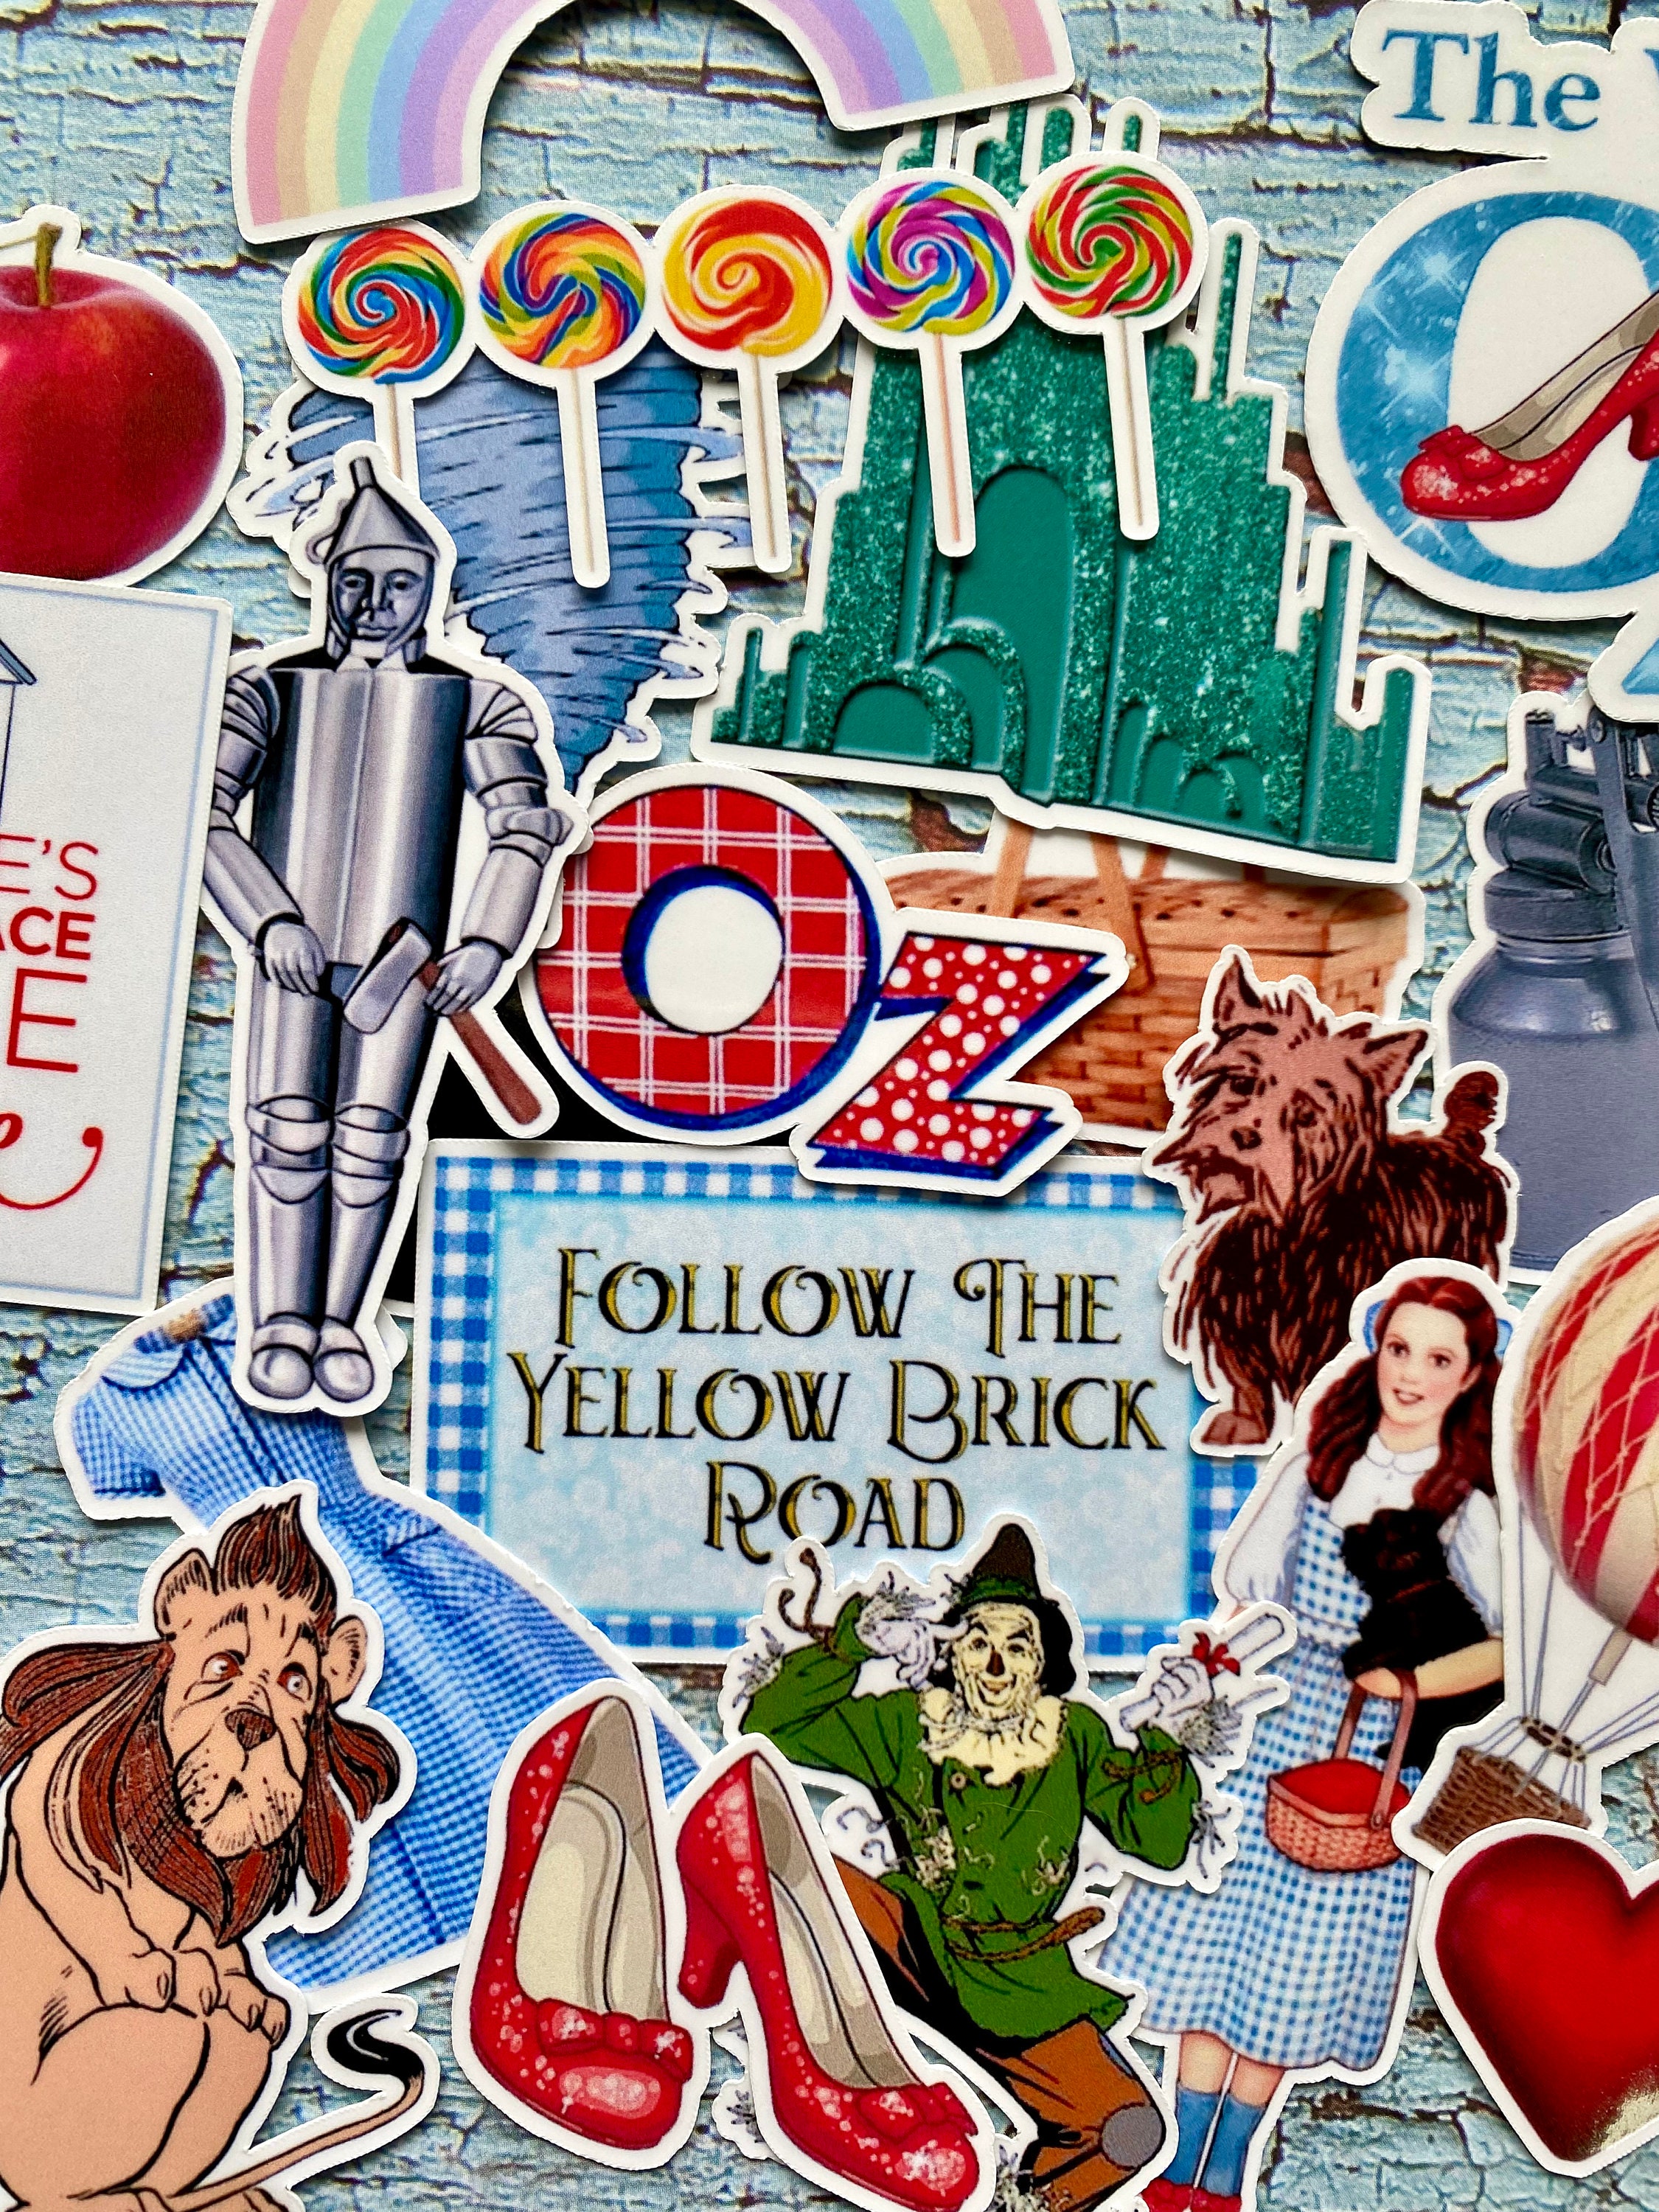 The Wizard of Oz Junk Journal Kit , Scrapbooking Journal Paper Pack  Elements Tags Paper Crafting Instant Download Digital Collage Sheet 